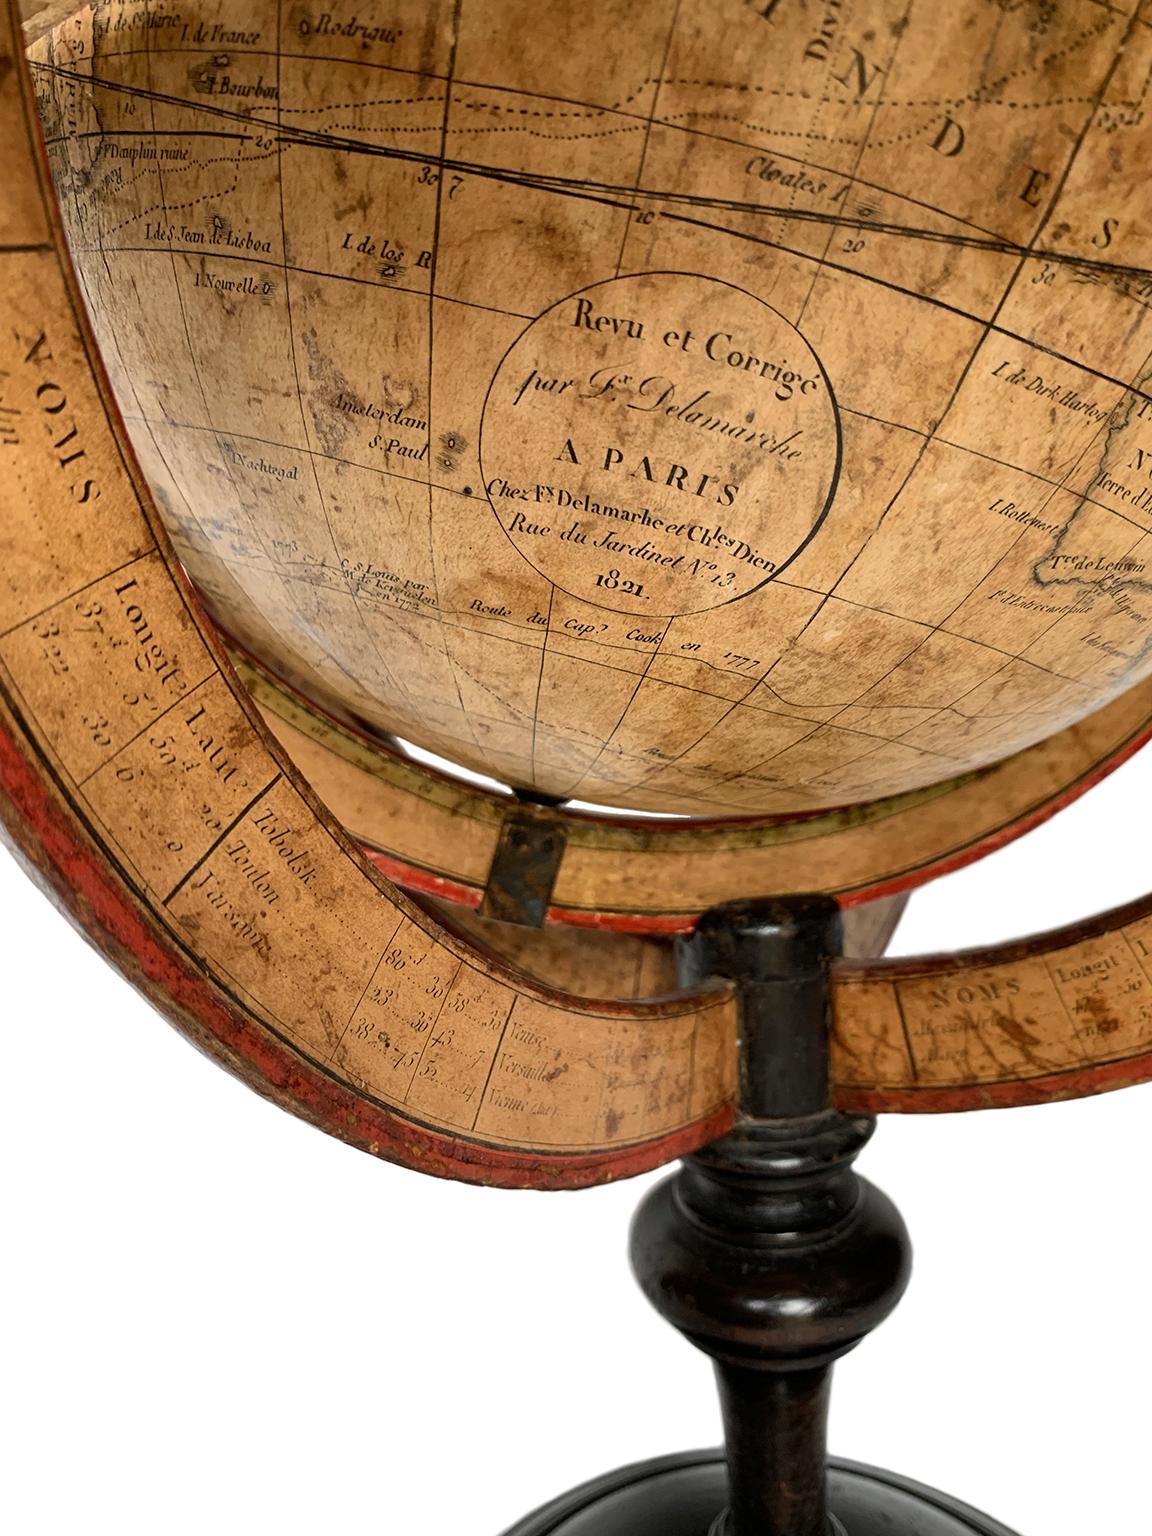 Terrestrial table globe
Félix Delamarche
Paris, 1821
It measures 20.47 in height, Ø max 14.17 in; the sphere Ø 9.44 in (h 52 cm x Ø max 36.5 cm; the sphere Ø 24 cm)
Wood, printed, papier-mâché and metal
It rests on its original turned wood